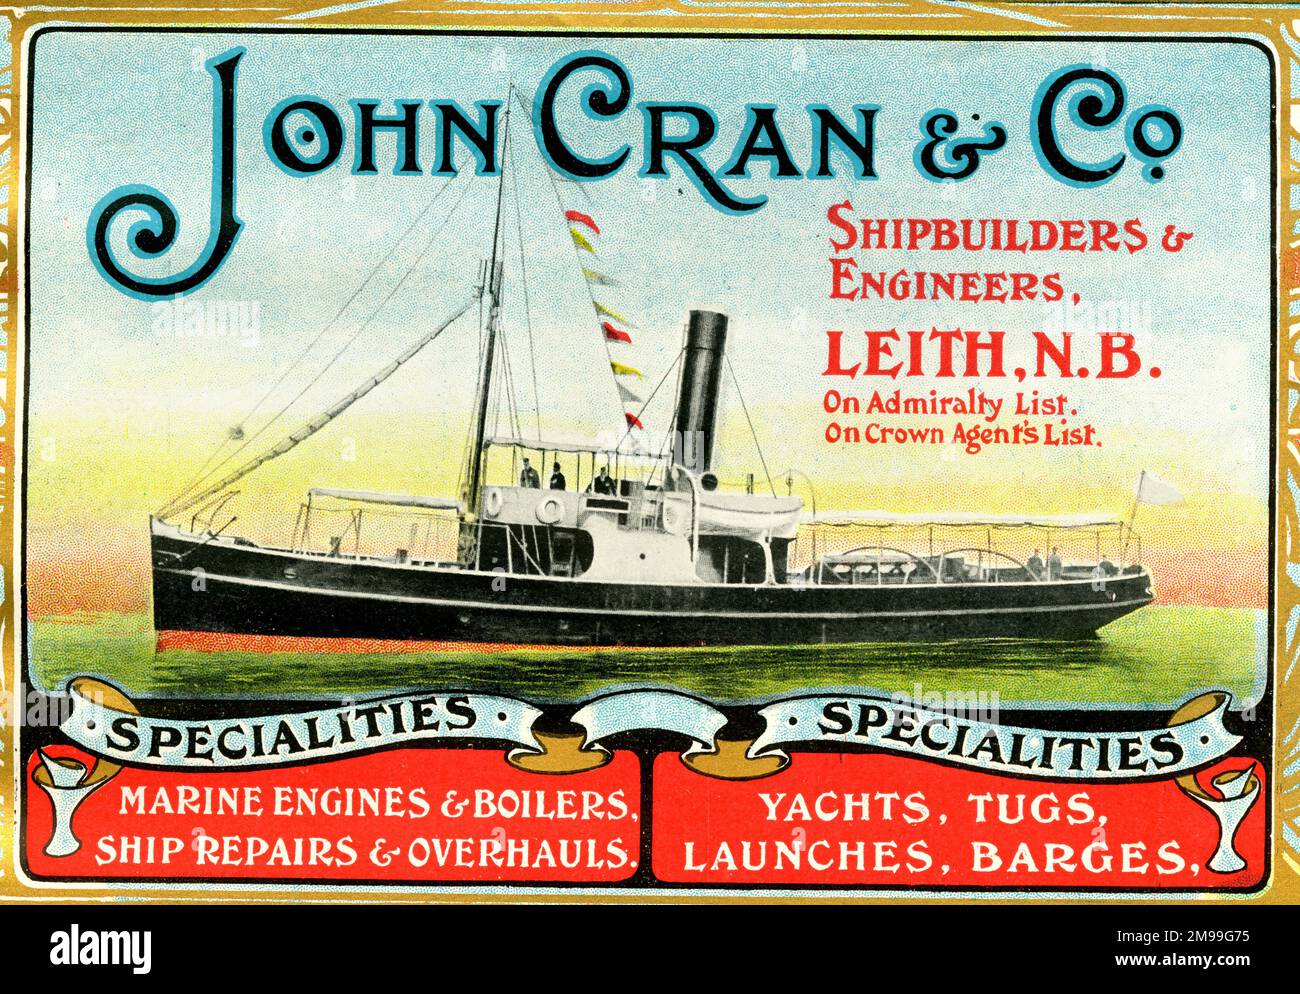 Advert for John Cran & Co, Shipbuilders and Engineers, Leith, Scotland. Stock Photo